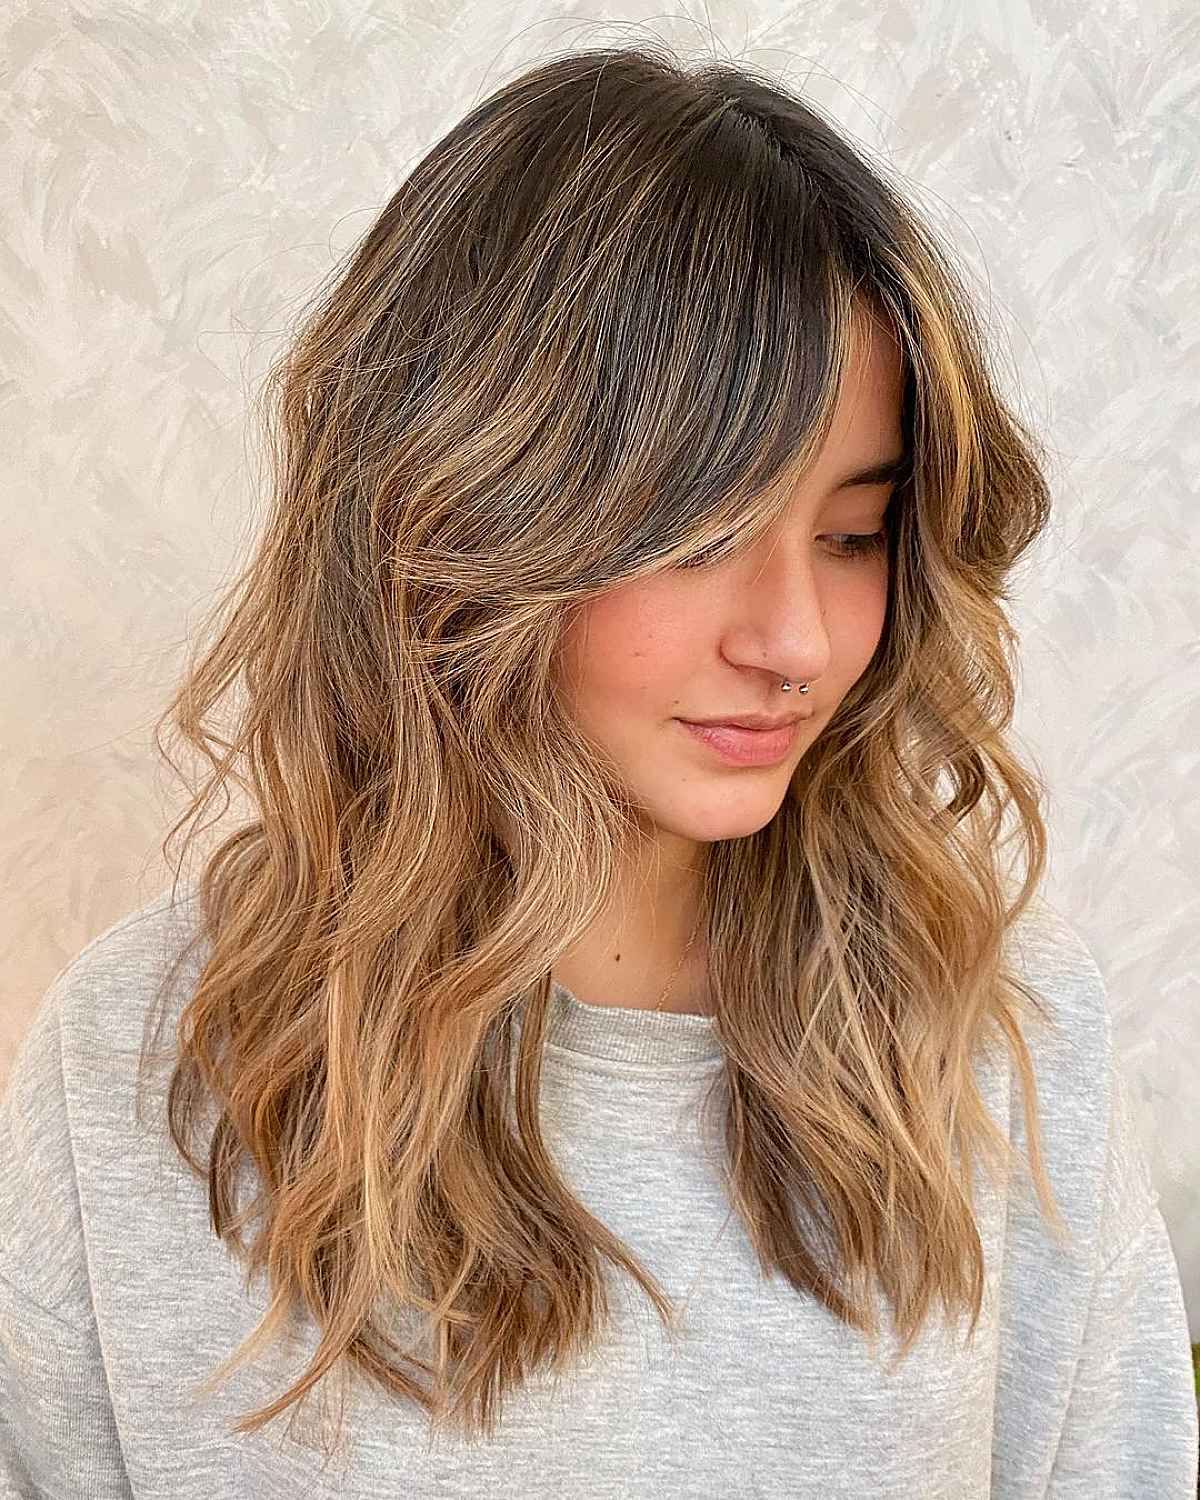 35 Coolest Shoulder Length Hair With Curtain Bangs You've Gotta See Within Latest Medium Hair With Long Curtain Bangs (View 10 of 18)